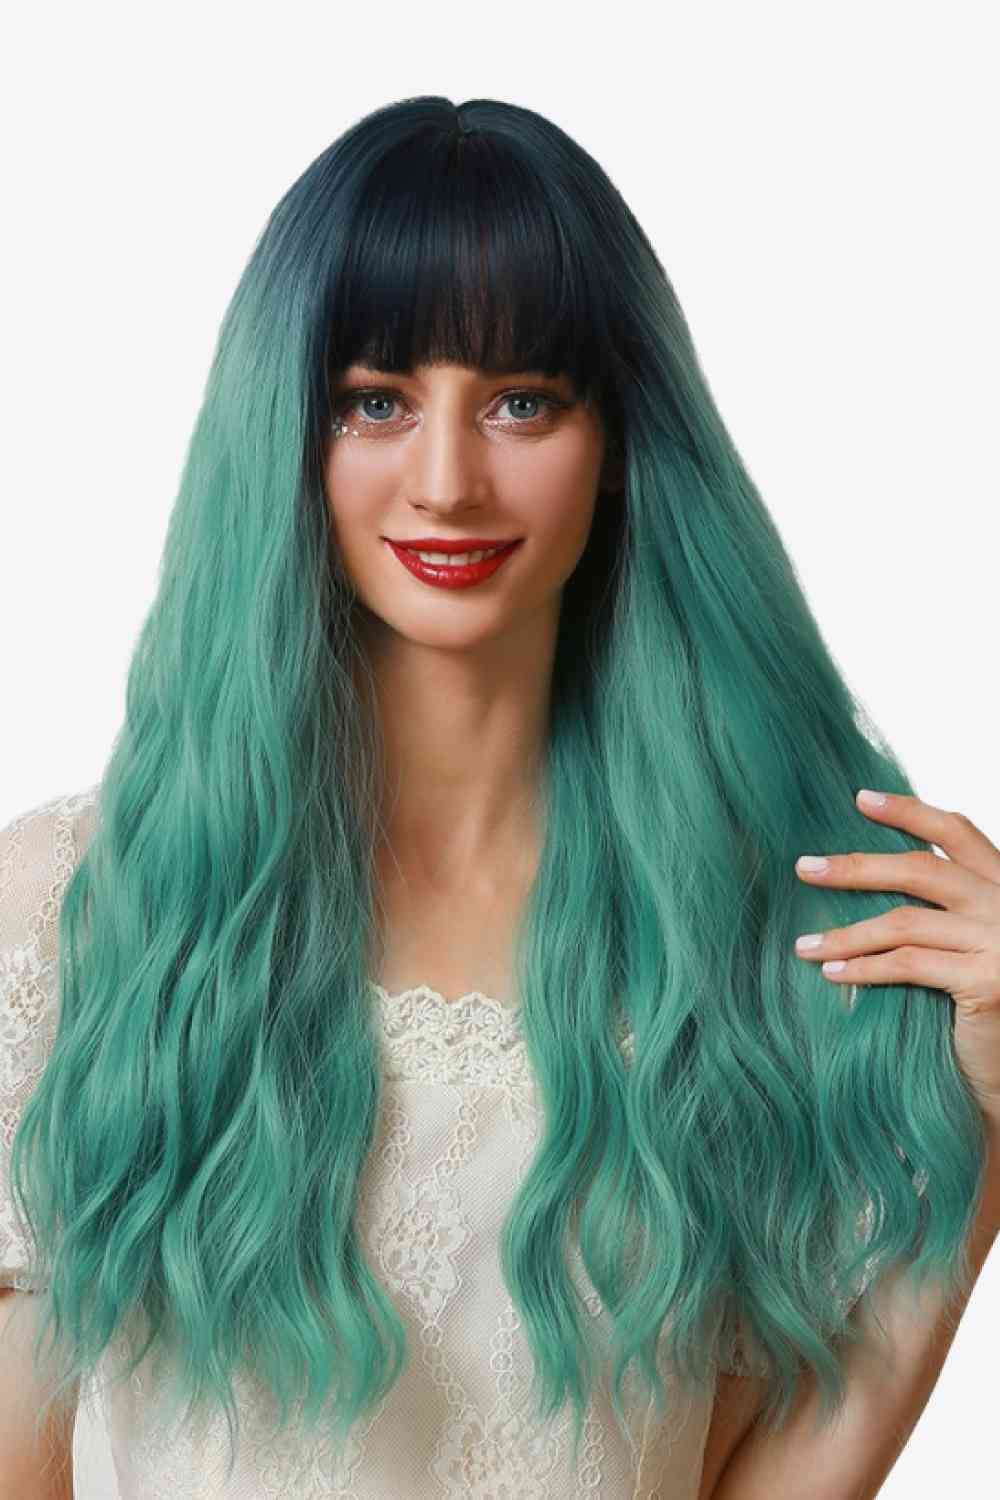 13*1" Full-Machine Wigs Synthetic Long Wave 26" in Seafoam Ombre Seafoam Ombre One Size